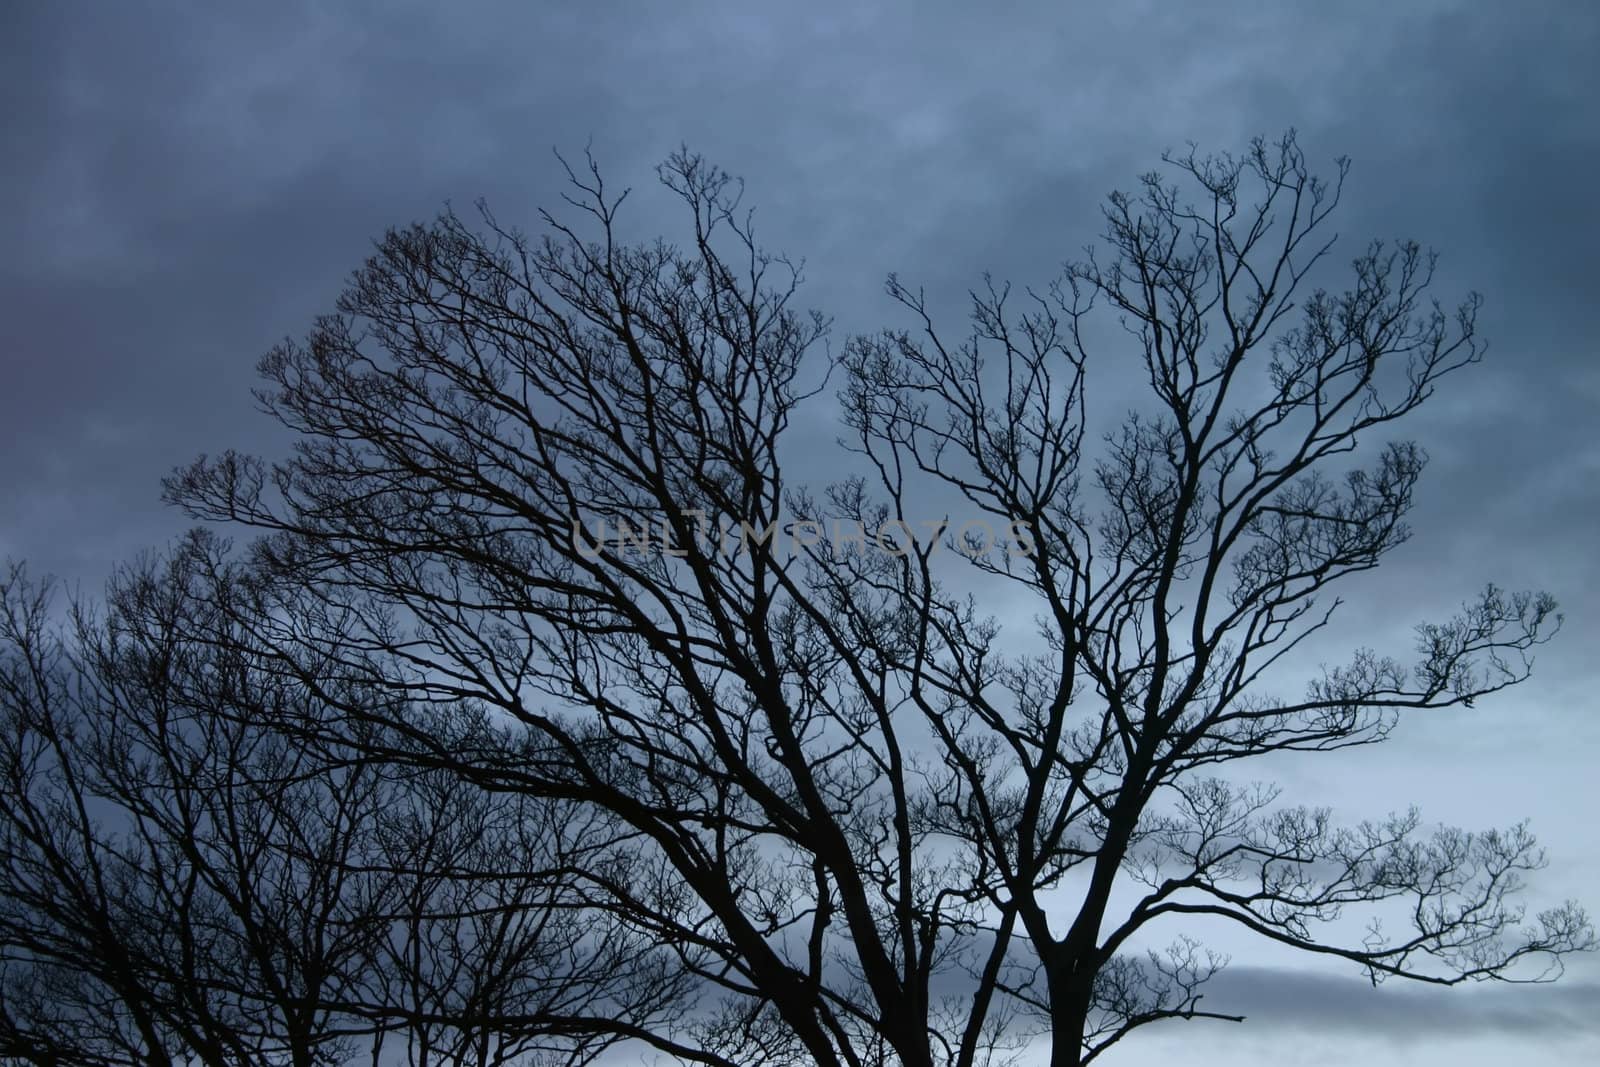 Winter Trees on a Stormy Evening by green308